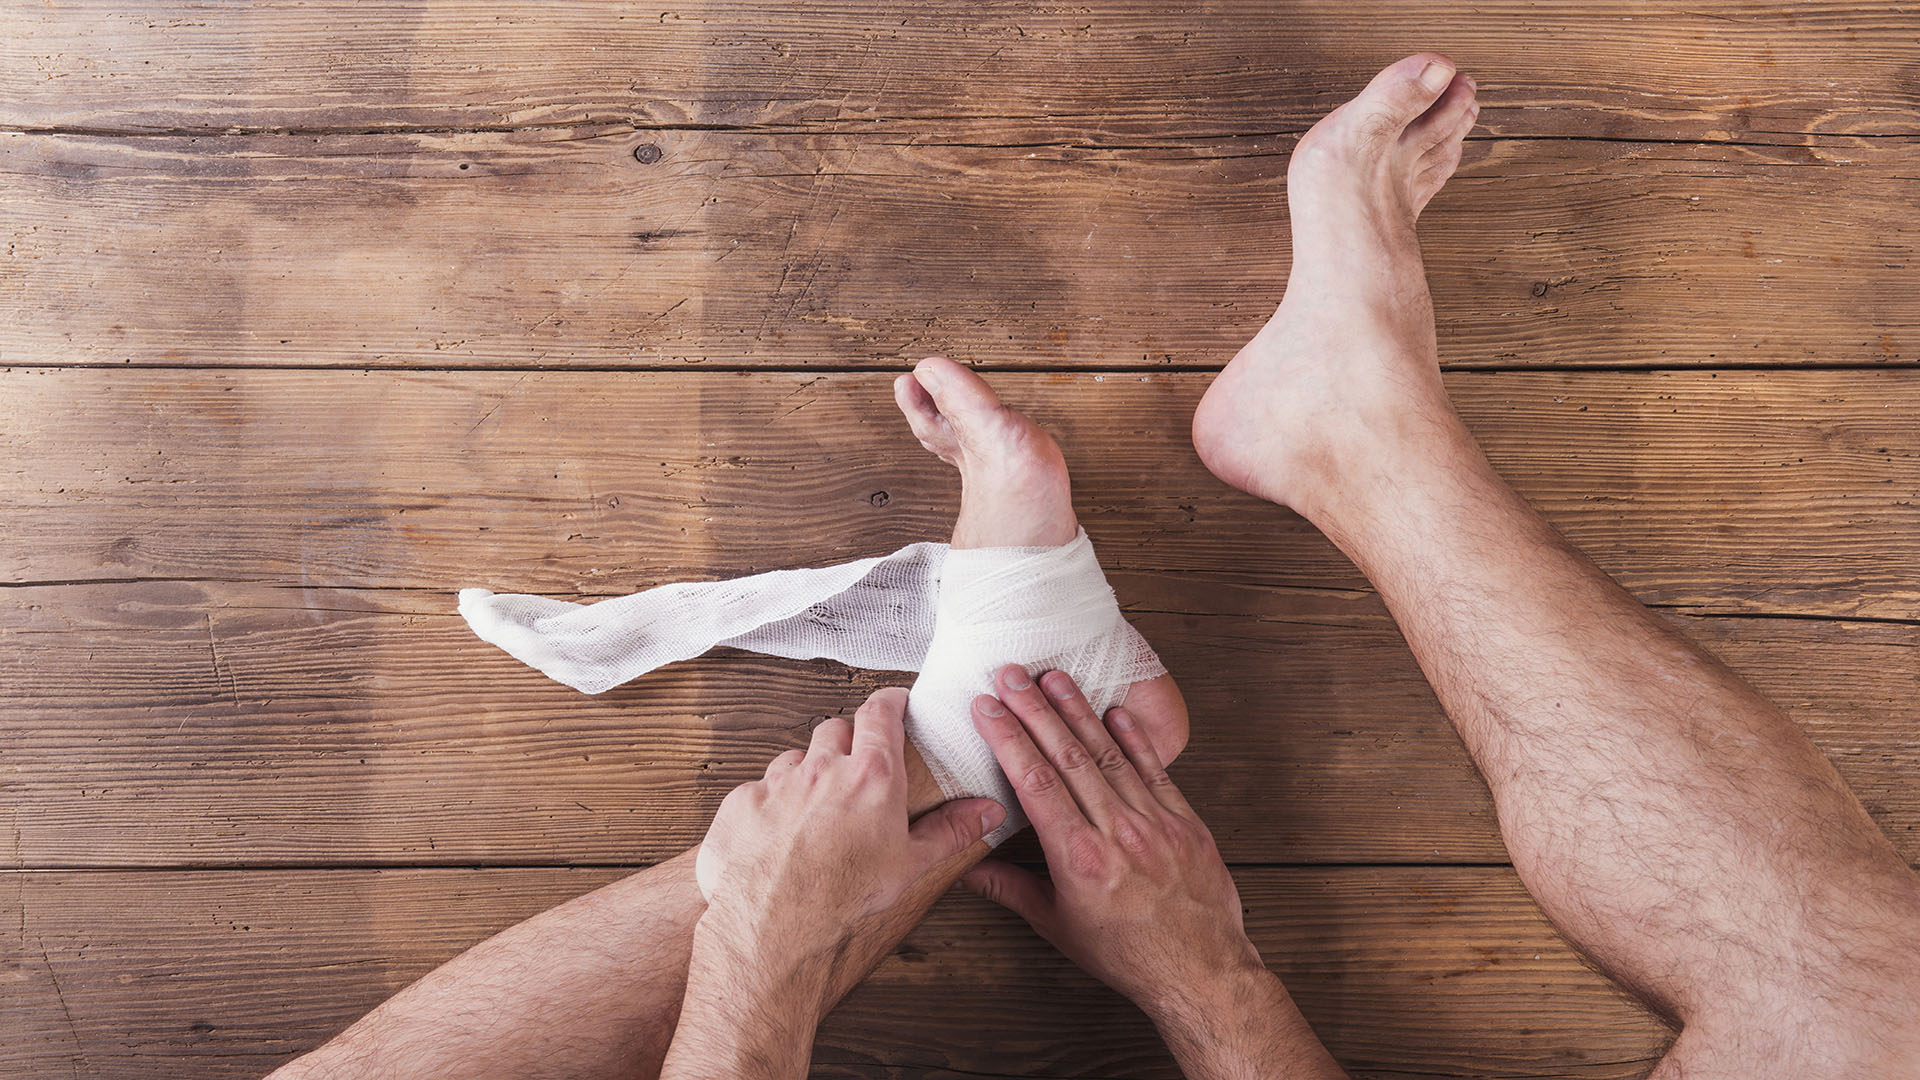 When Should You Seek Treatment for An Ankle Ligament Tear?